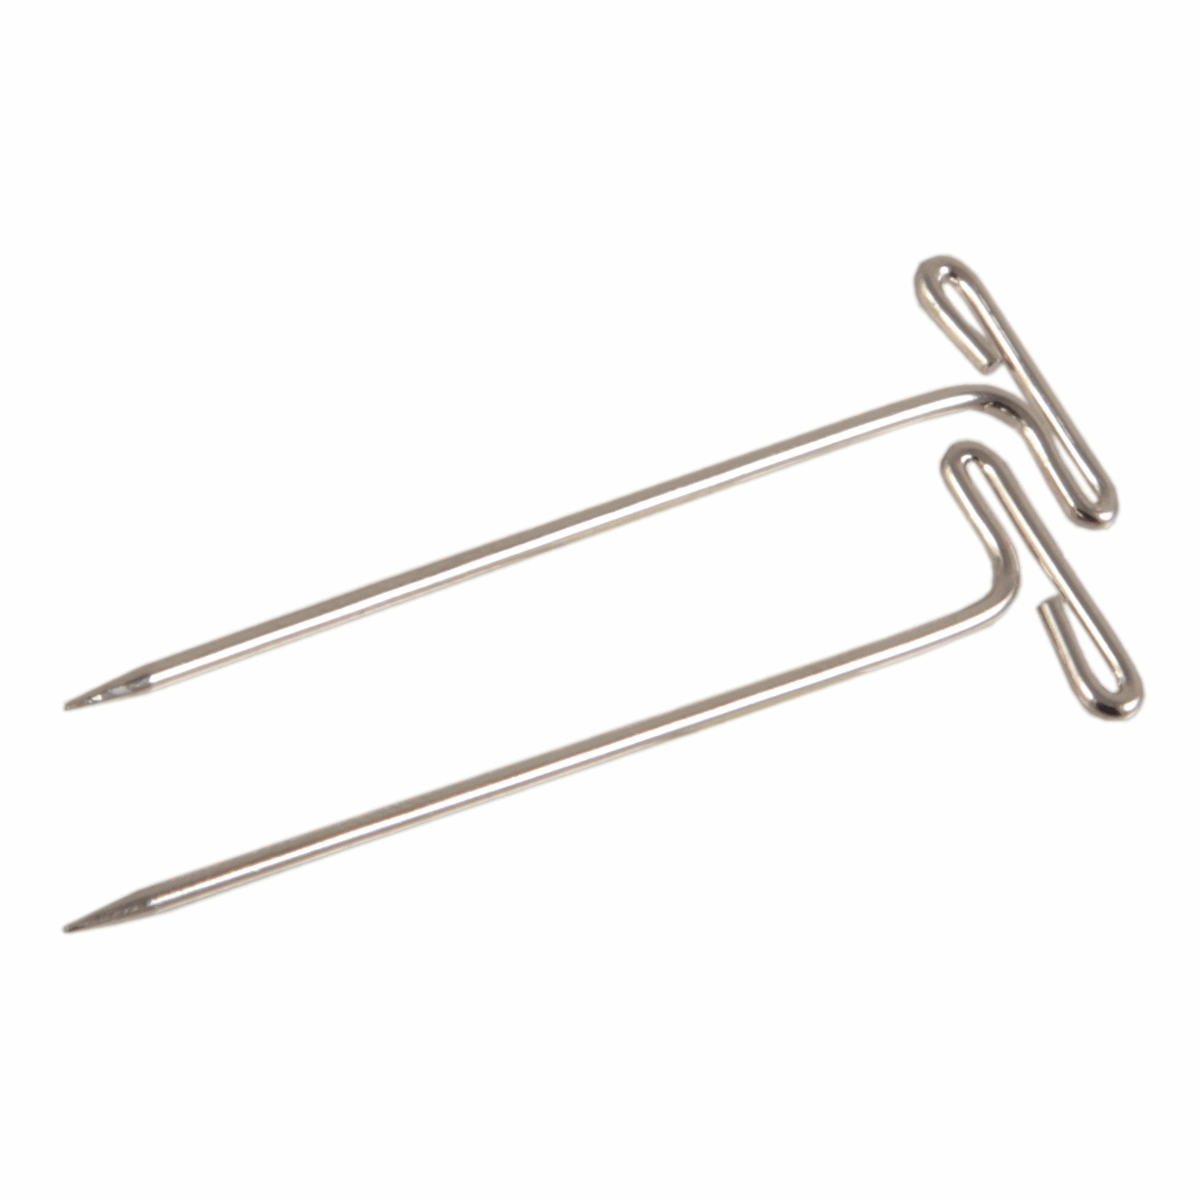 KnitPro T-Pins - Pack of 50